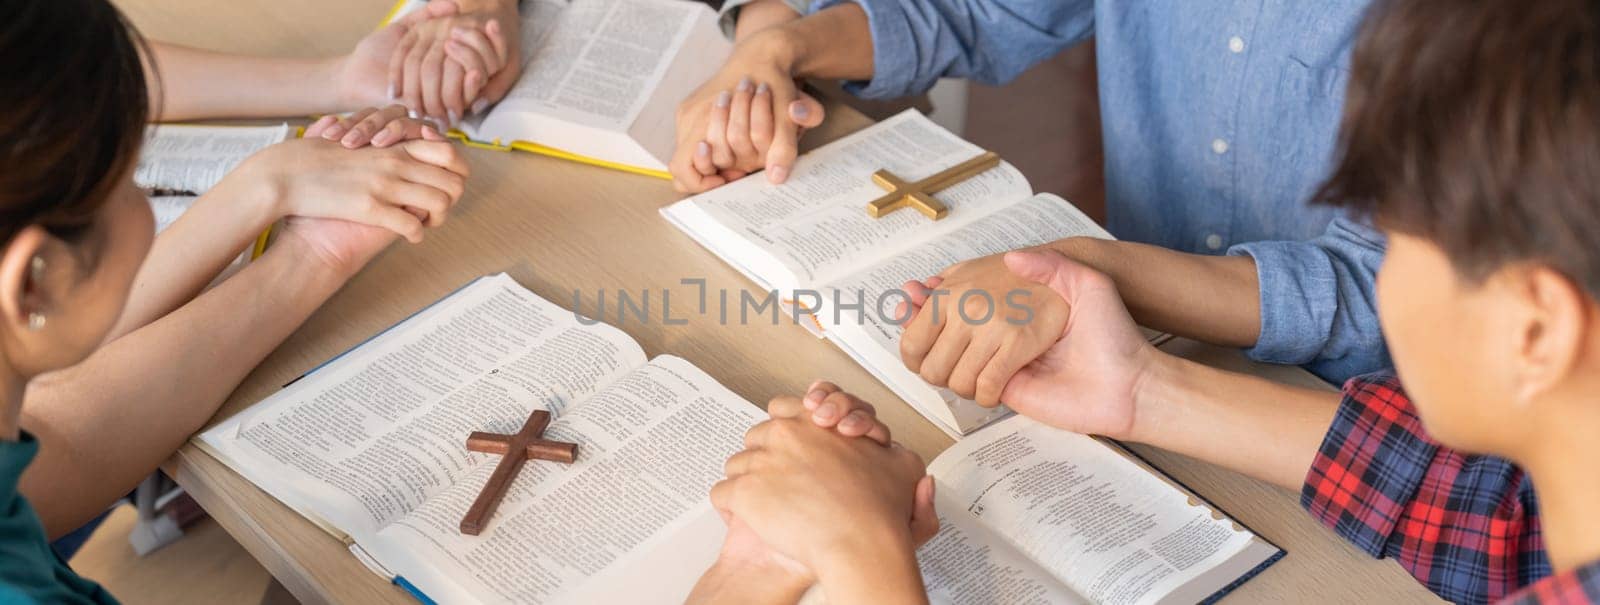 Believer hand praying together on bible book while holding hand. Burgeoning by biancoblue